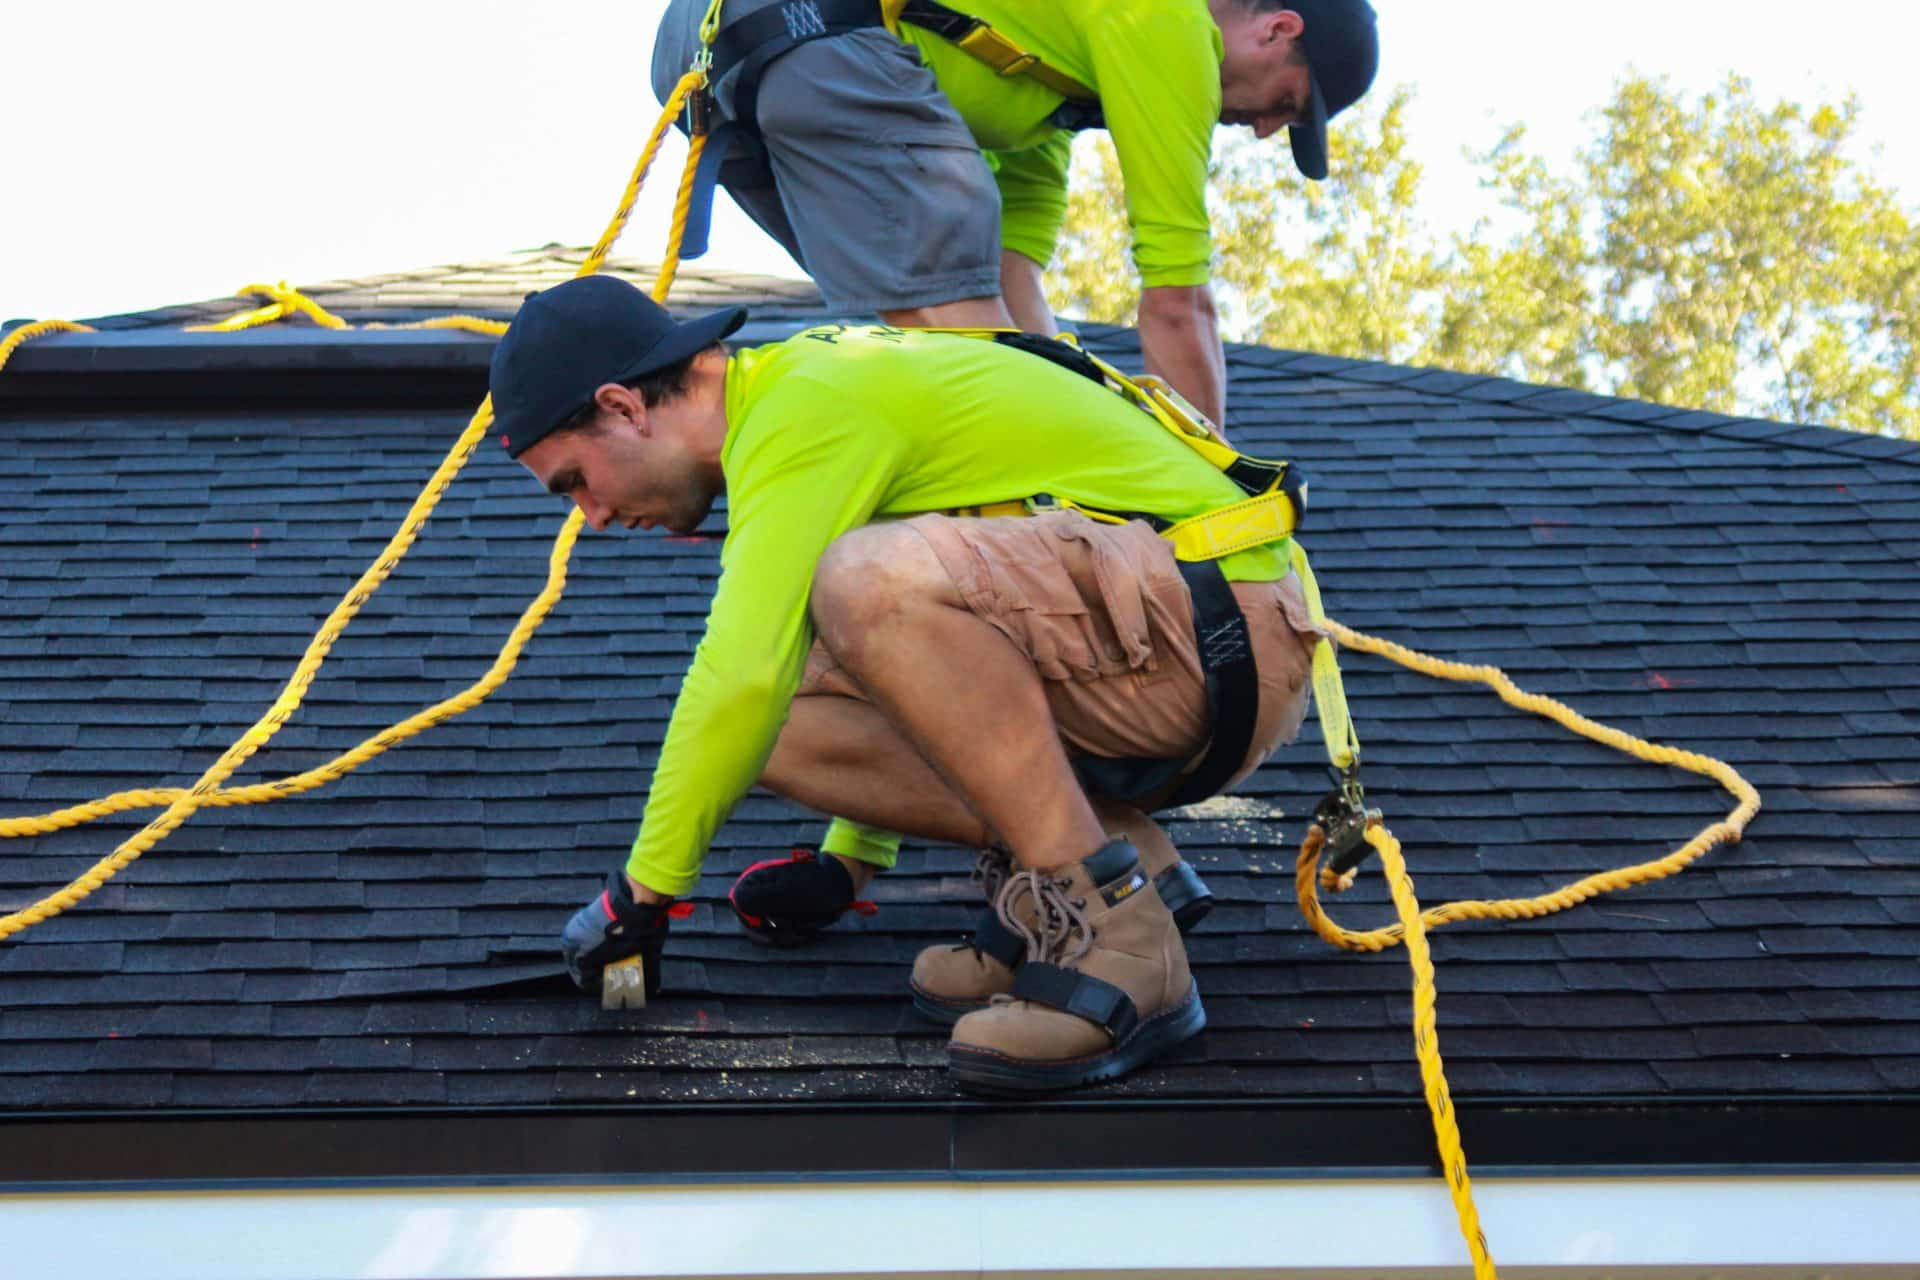 two men in high visibility clothing working on a roof